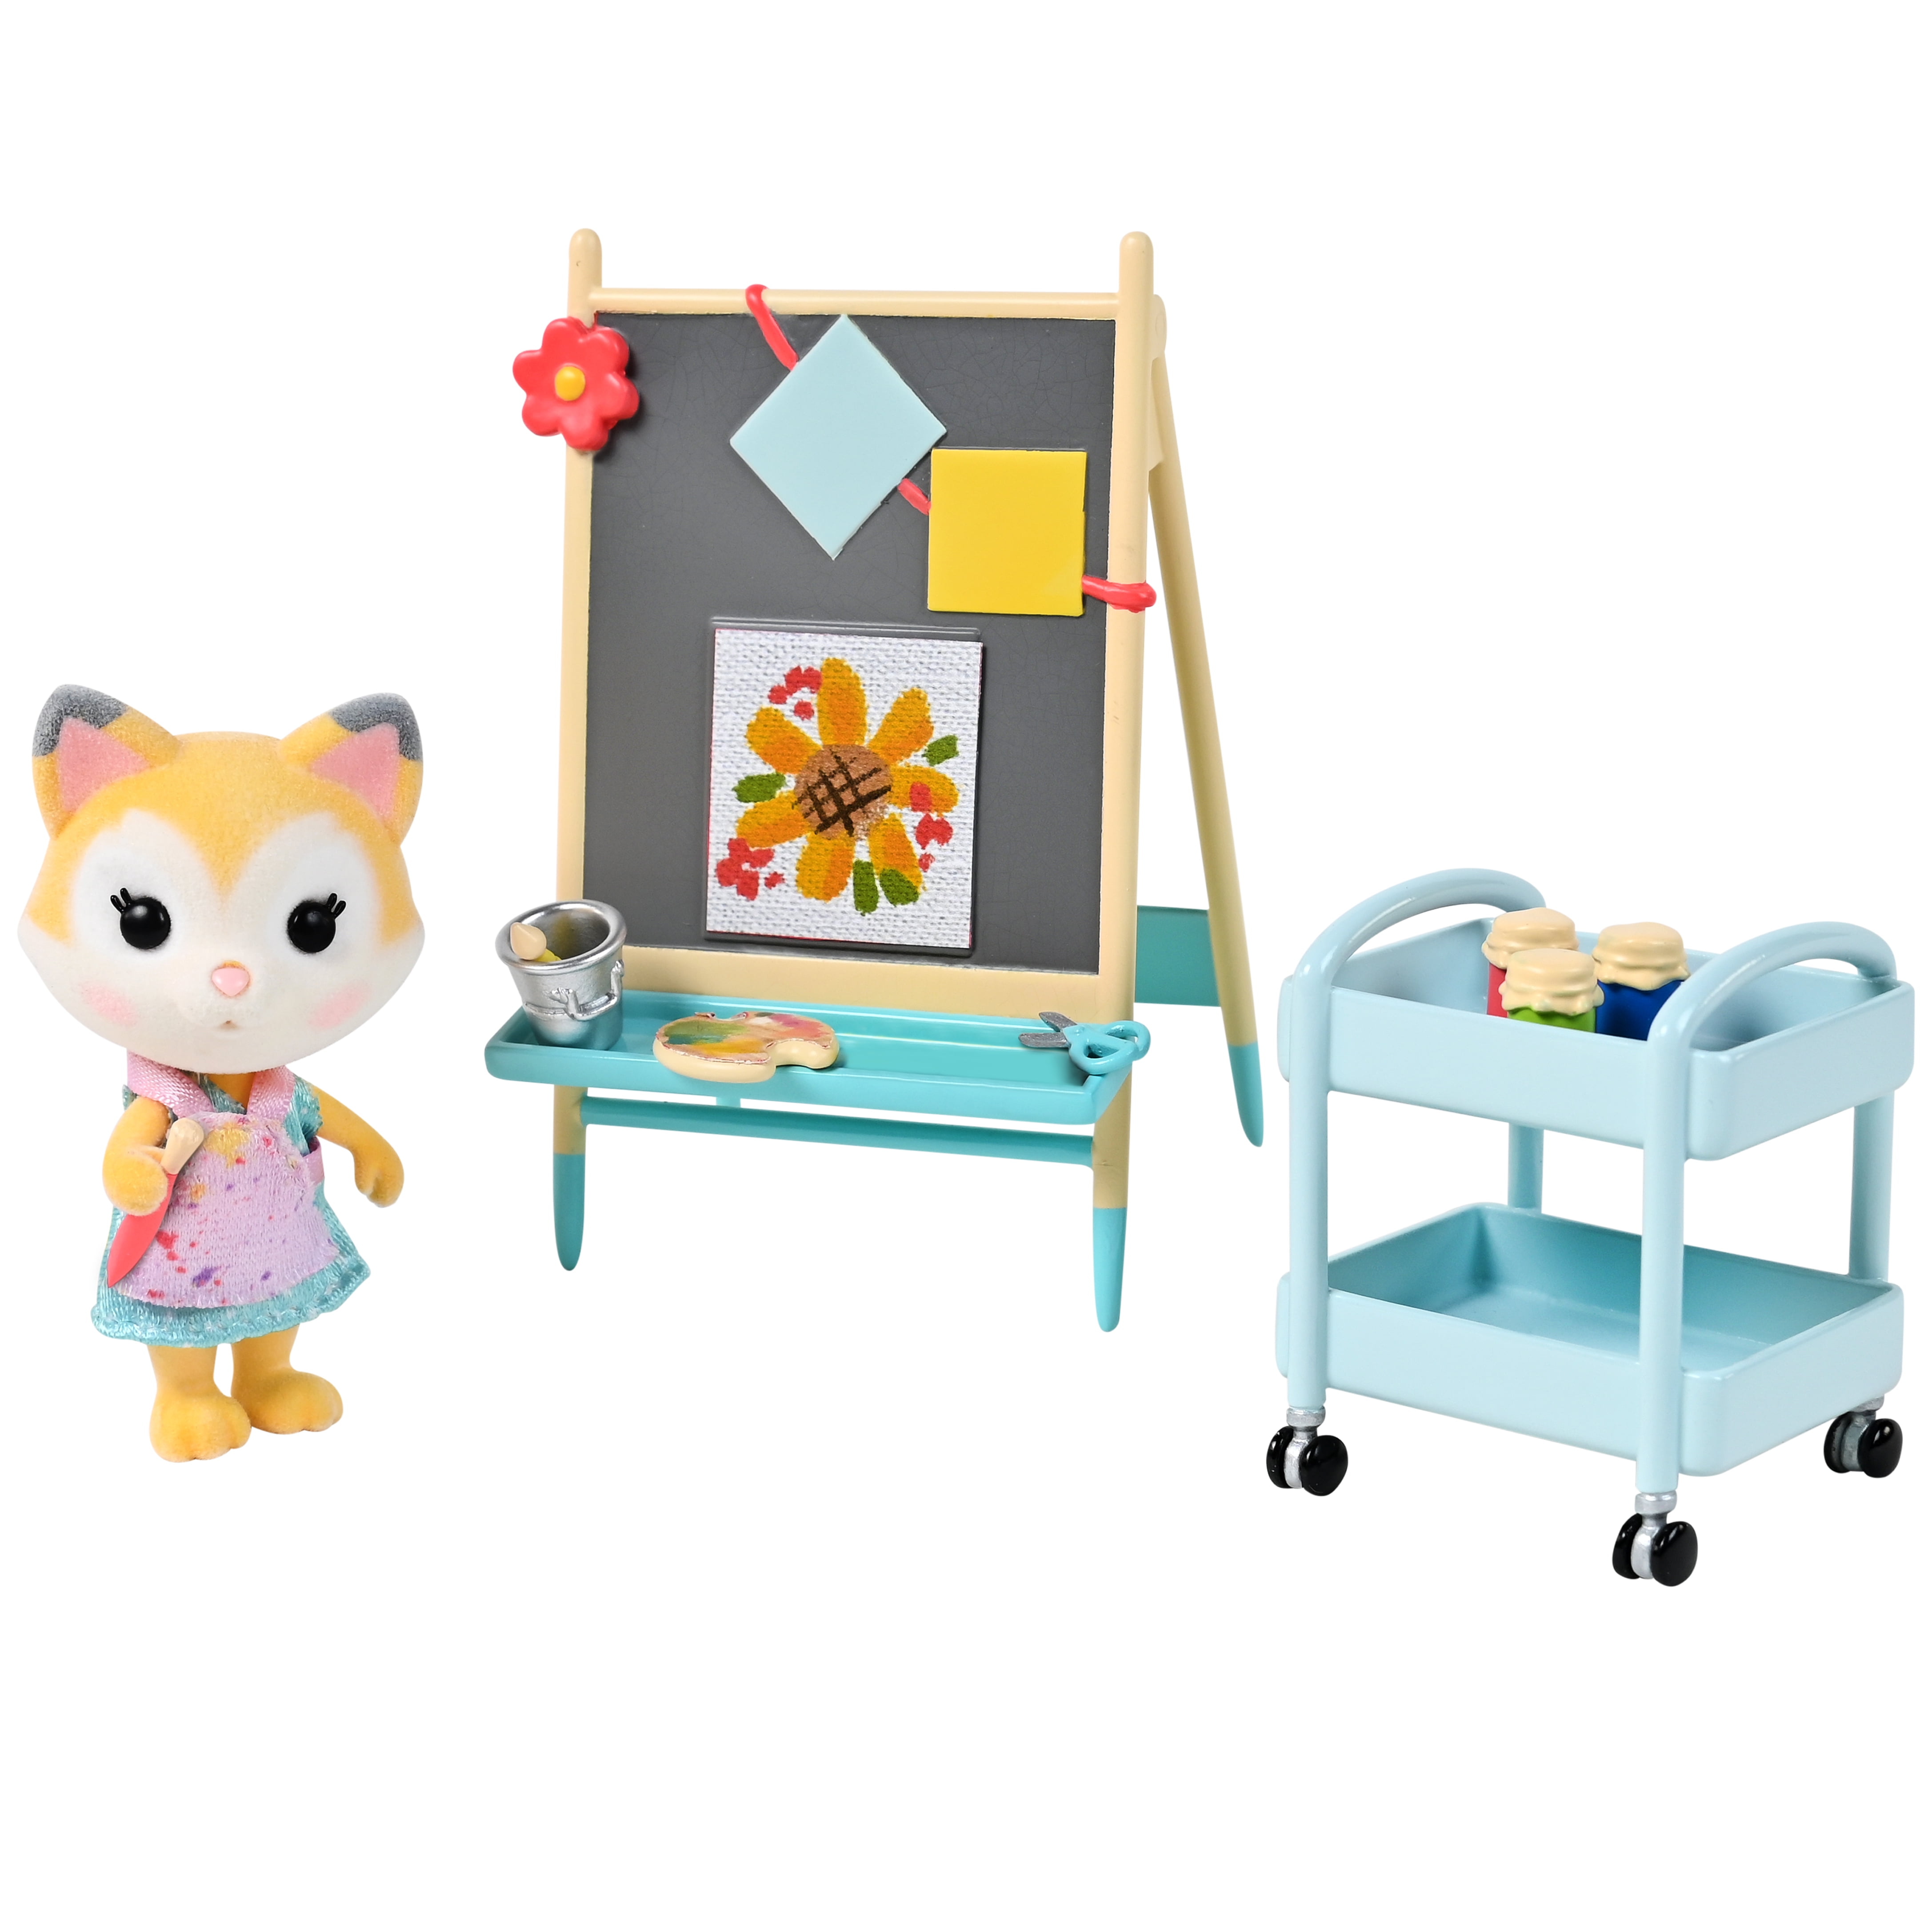 Sunny Days Entertainment Honey Bee Acres Paint & Color Art Fun, Complete set with Miniature Doll Figure, 13 Pieces, Ages 3 and up